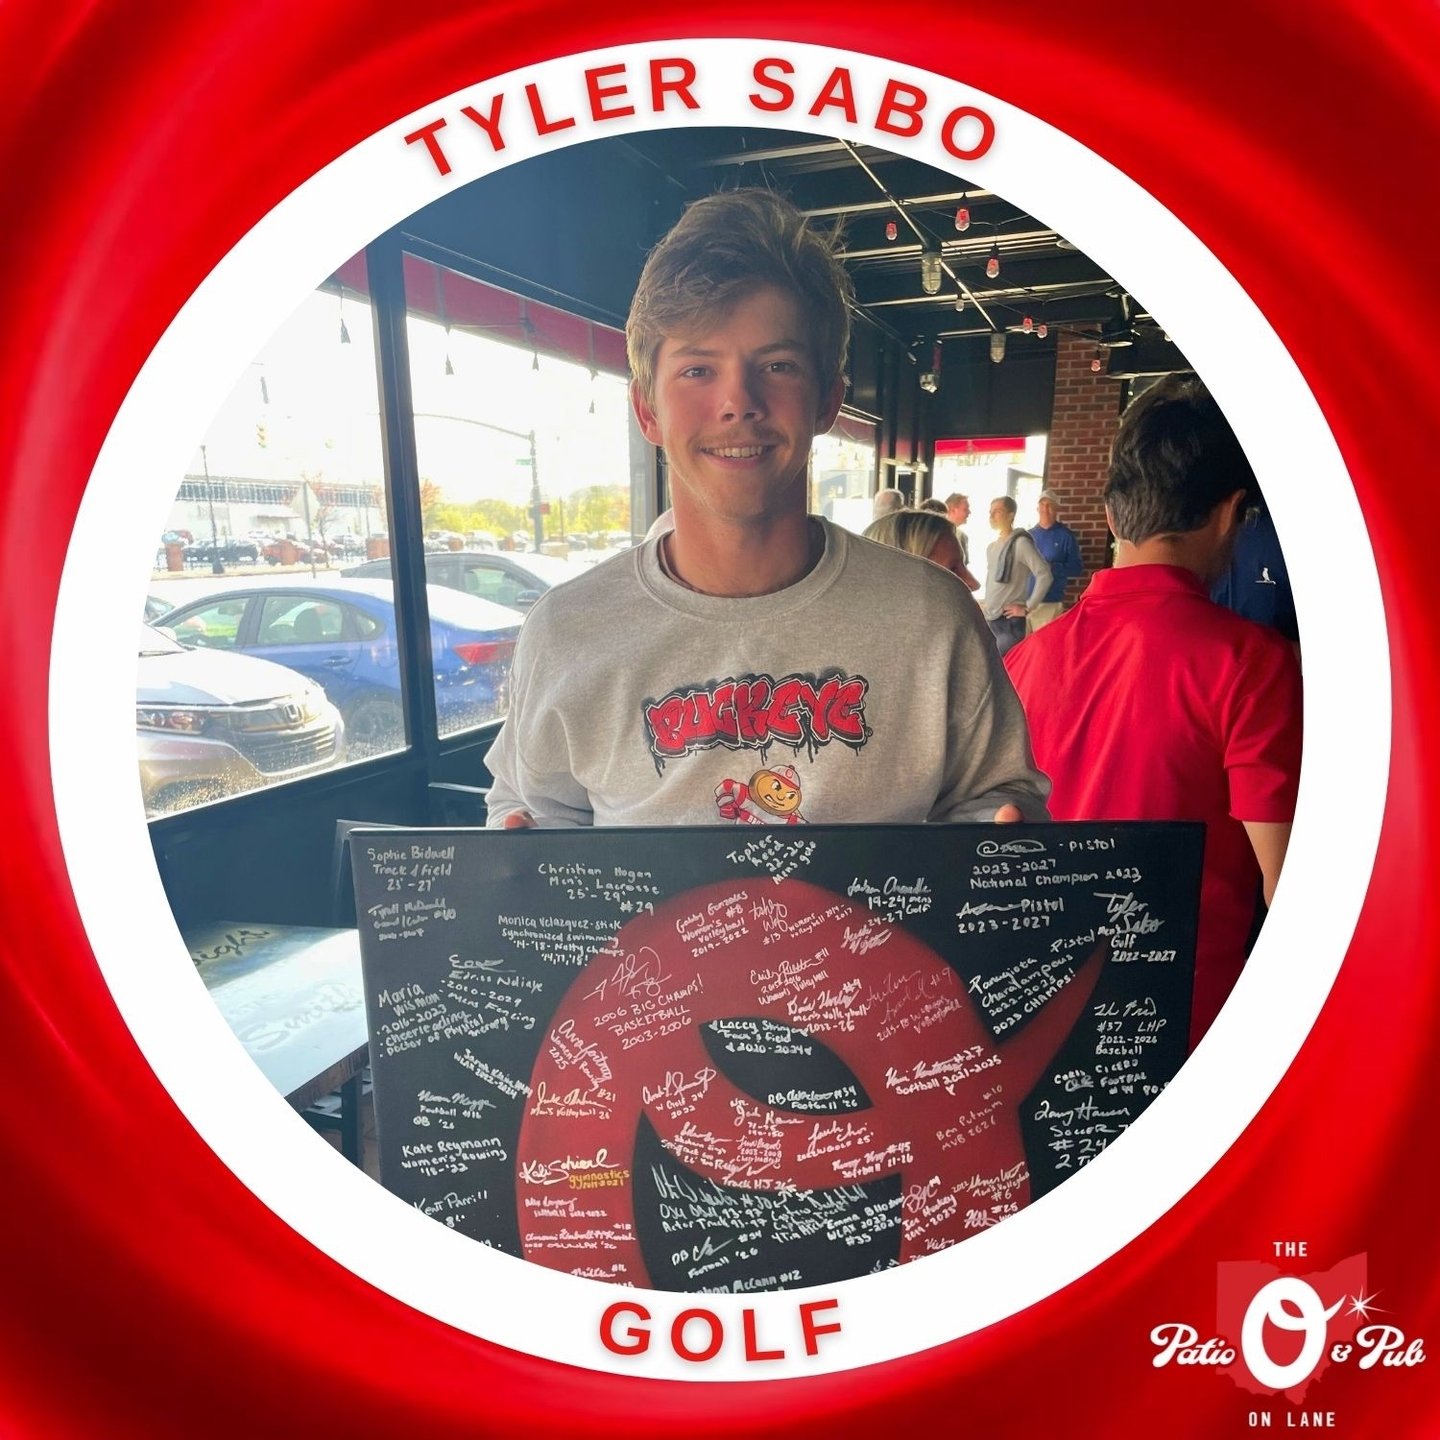 ✨Congratulations to TYLER SABO and OSU Men&rsquo;s Golf on earning the Buckeyes a trip to the NCAA Championship for the third consecutive season ⛳ #GoBucks